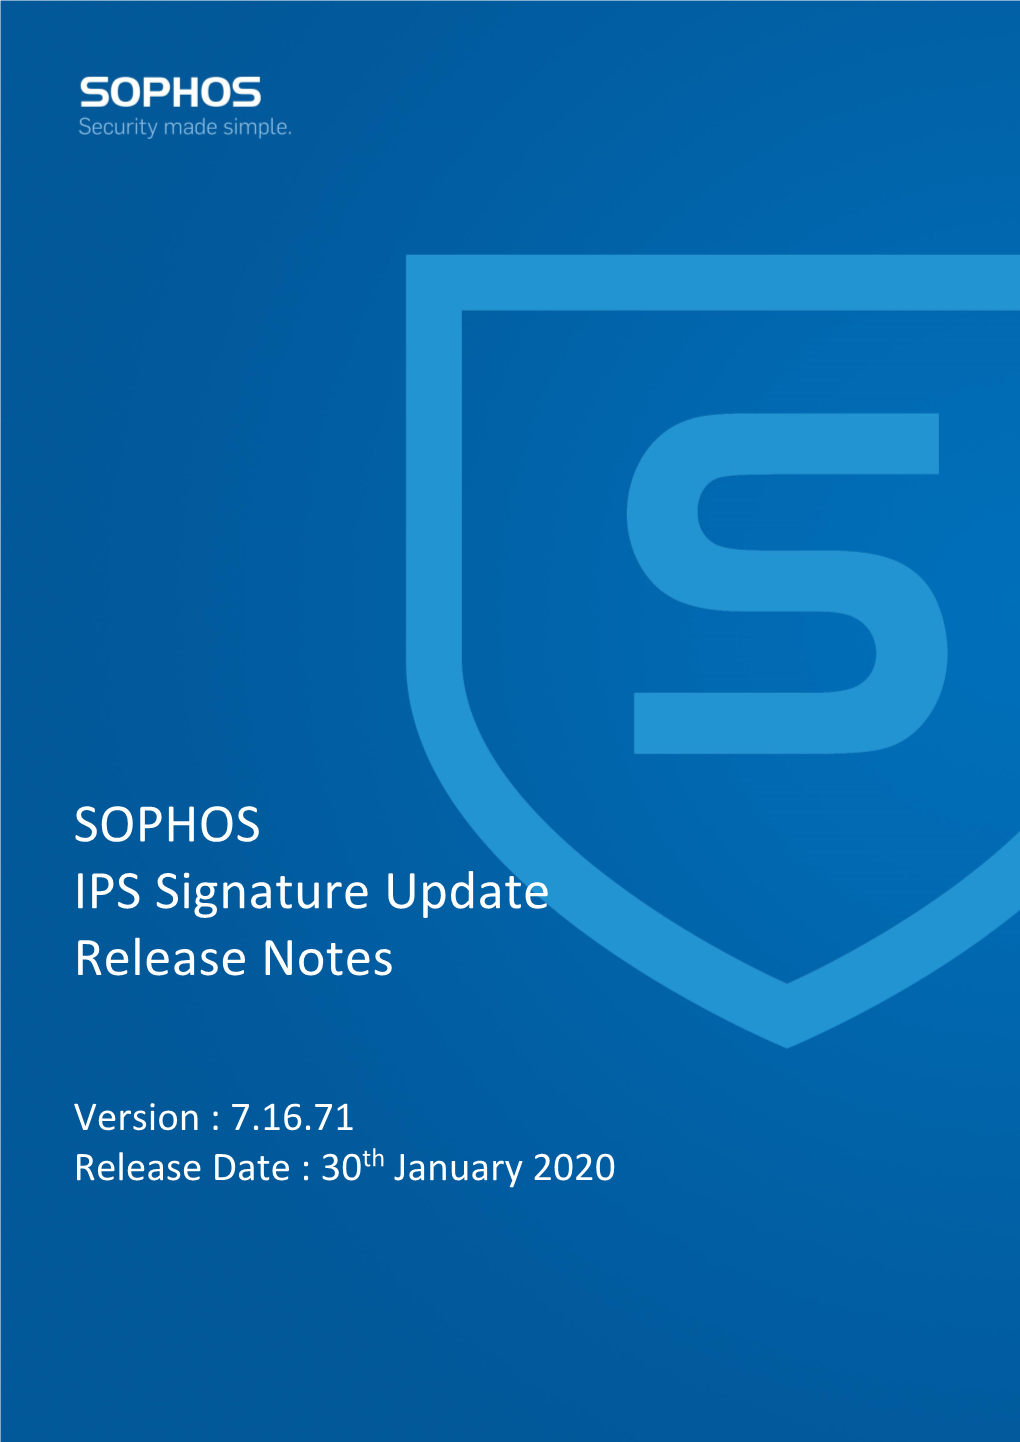 IPS Signature Release Note V7.16.71